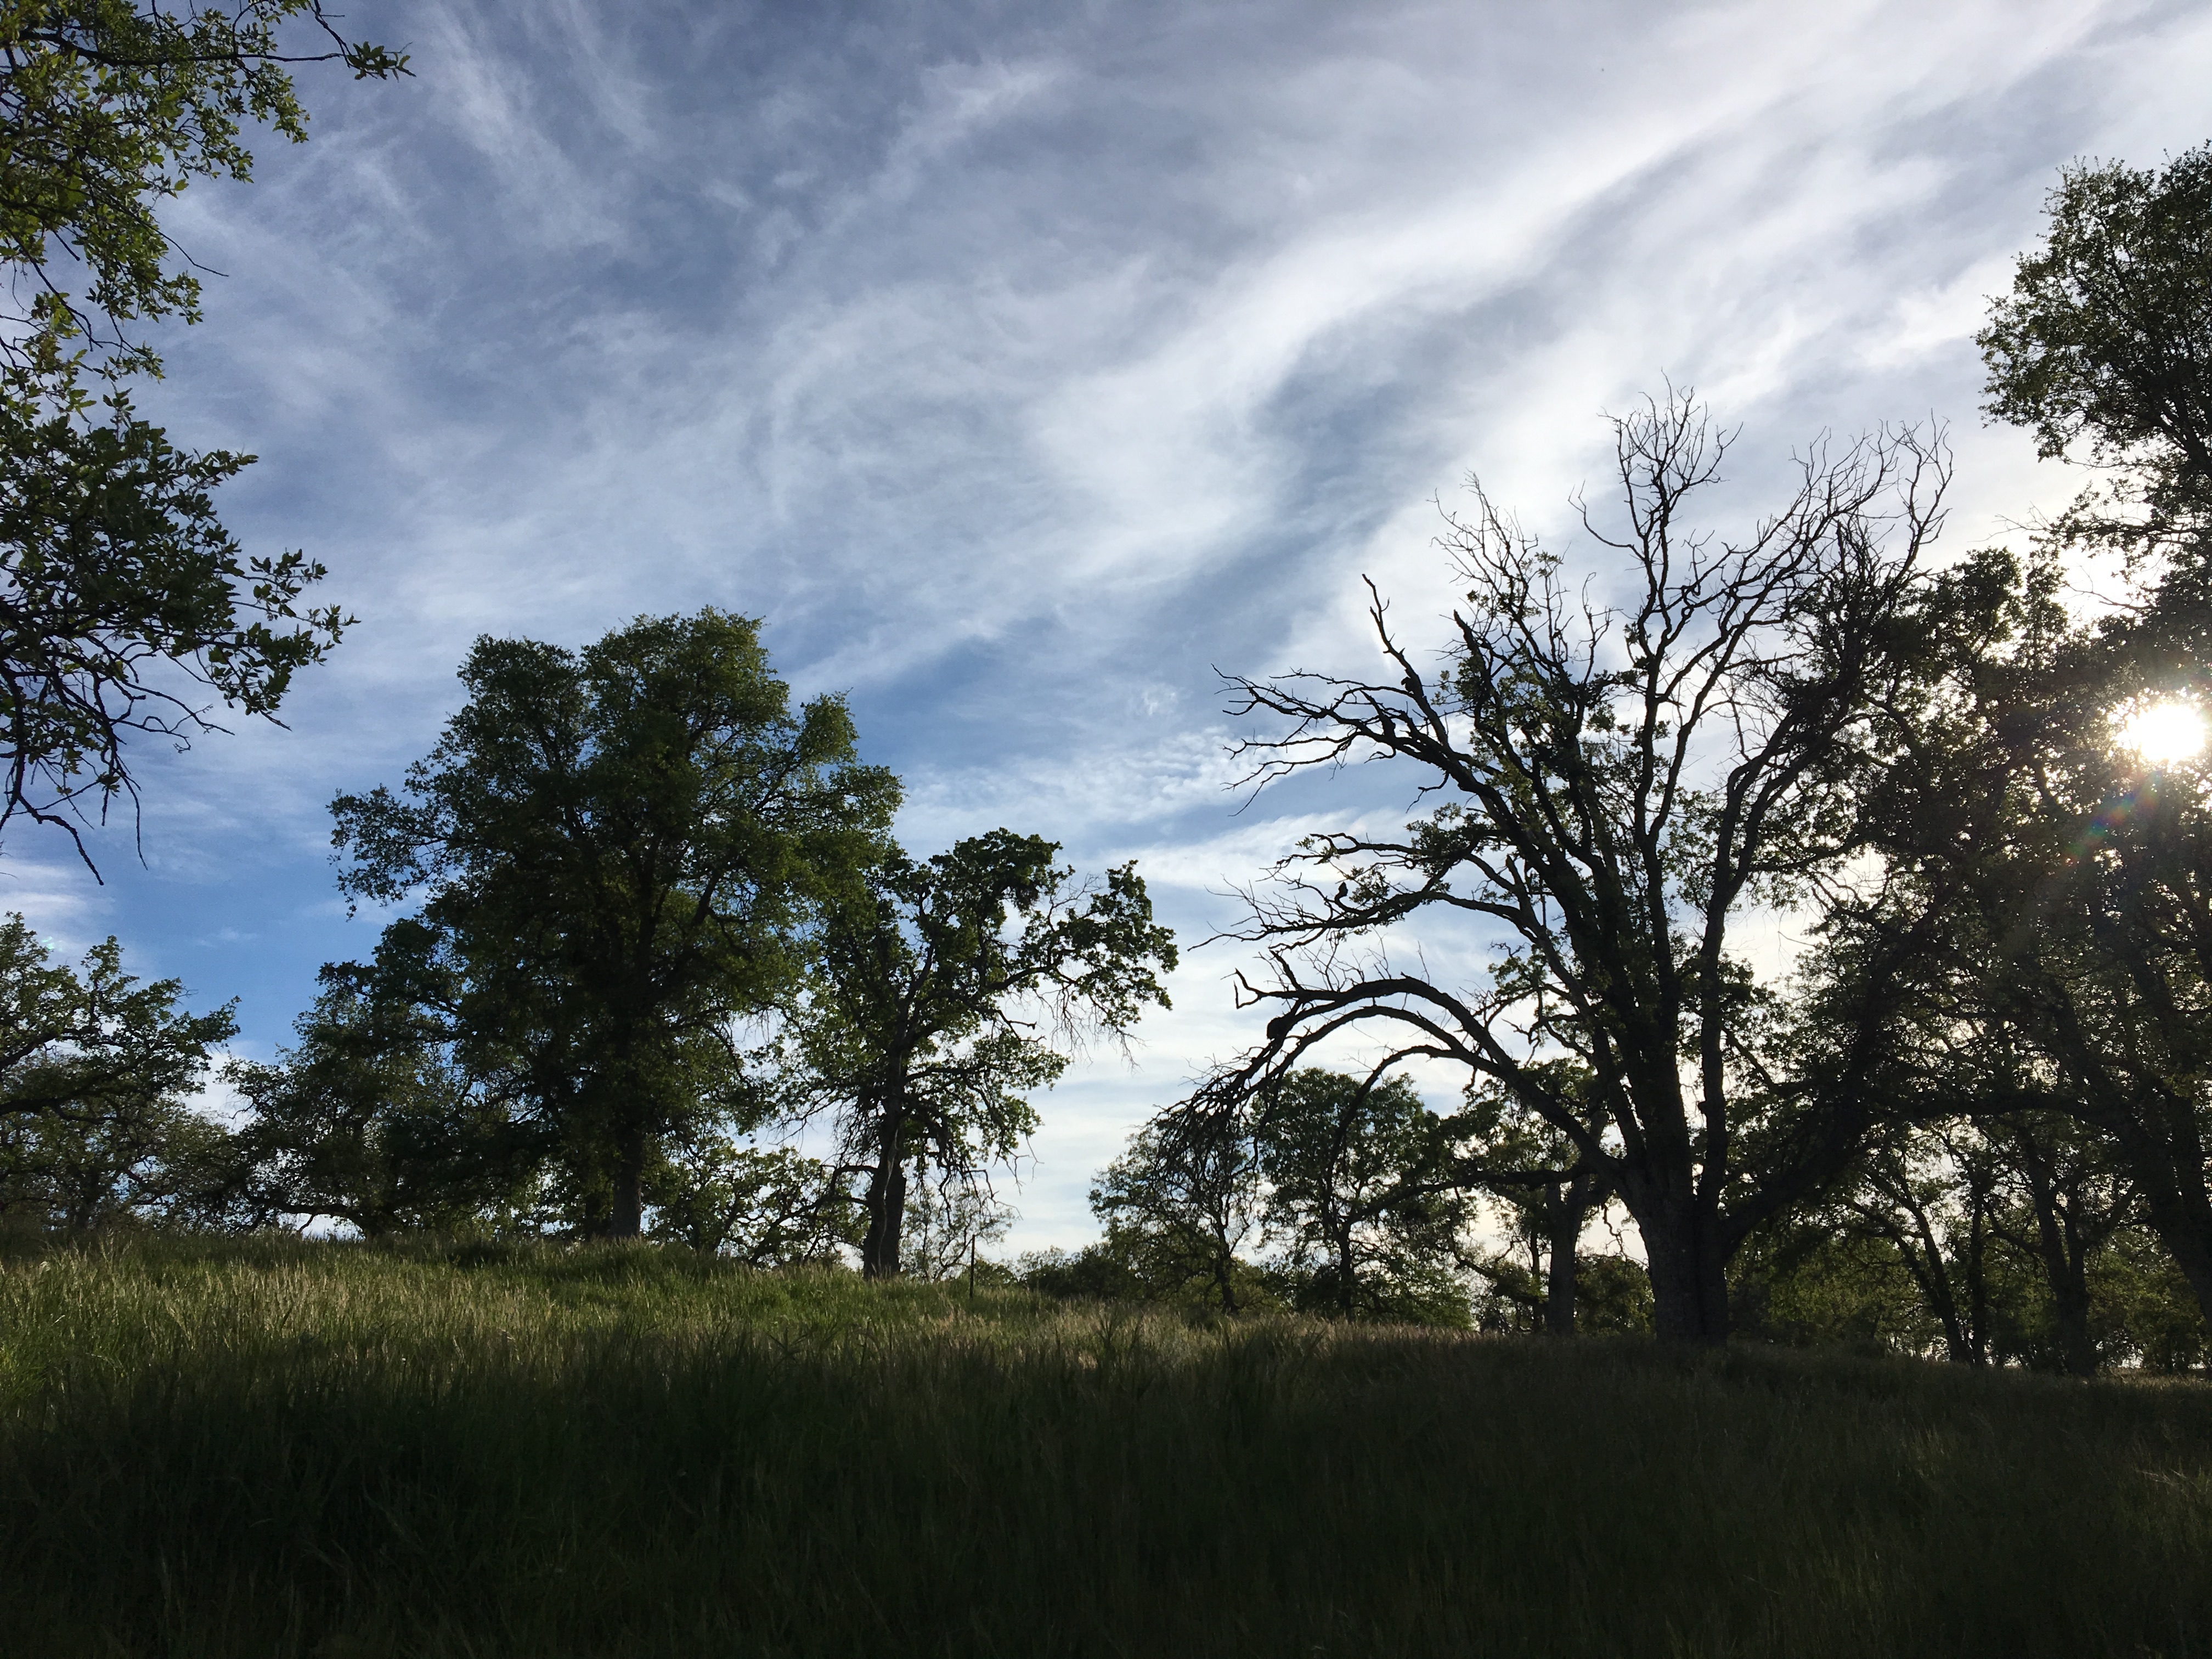 Sampling site. Oak trees tower over a green grassland with clouds in the background.